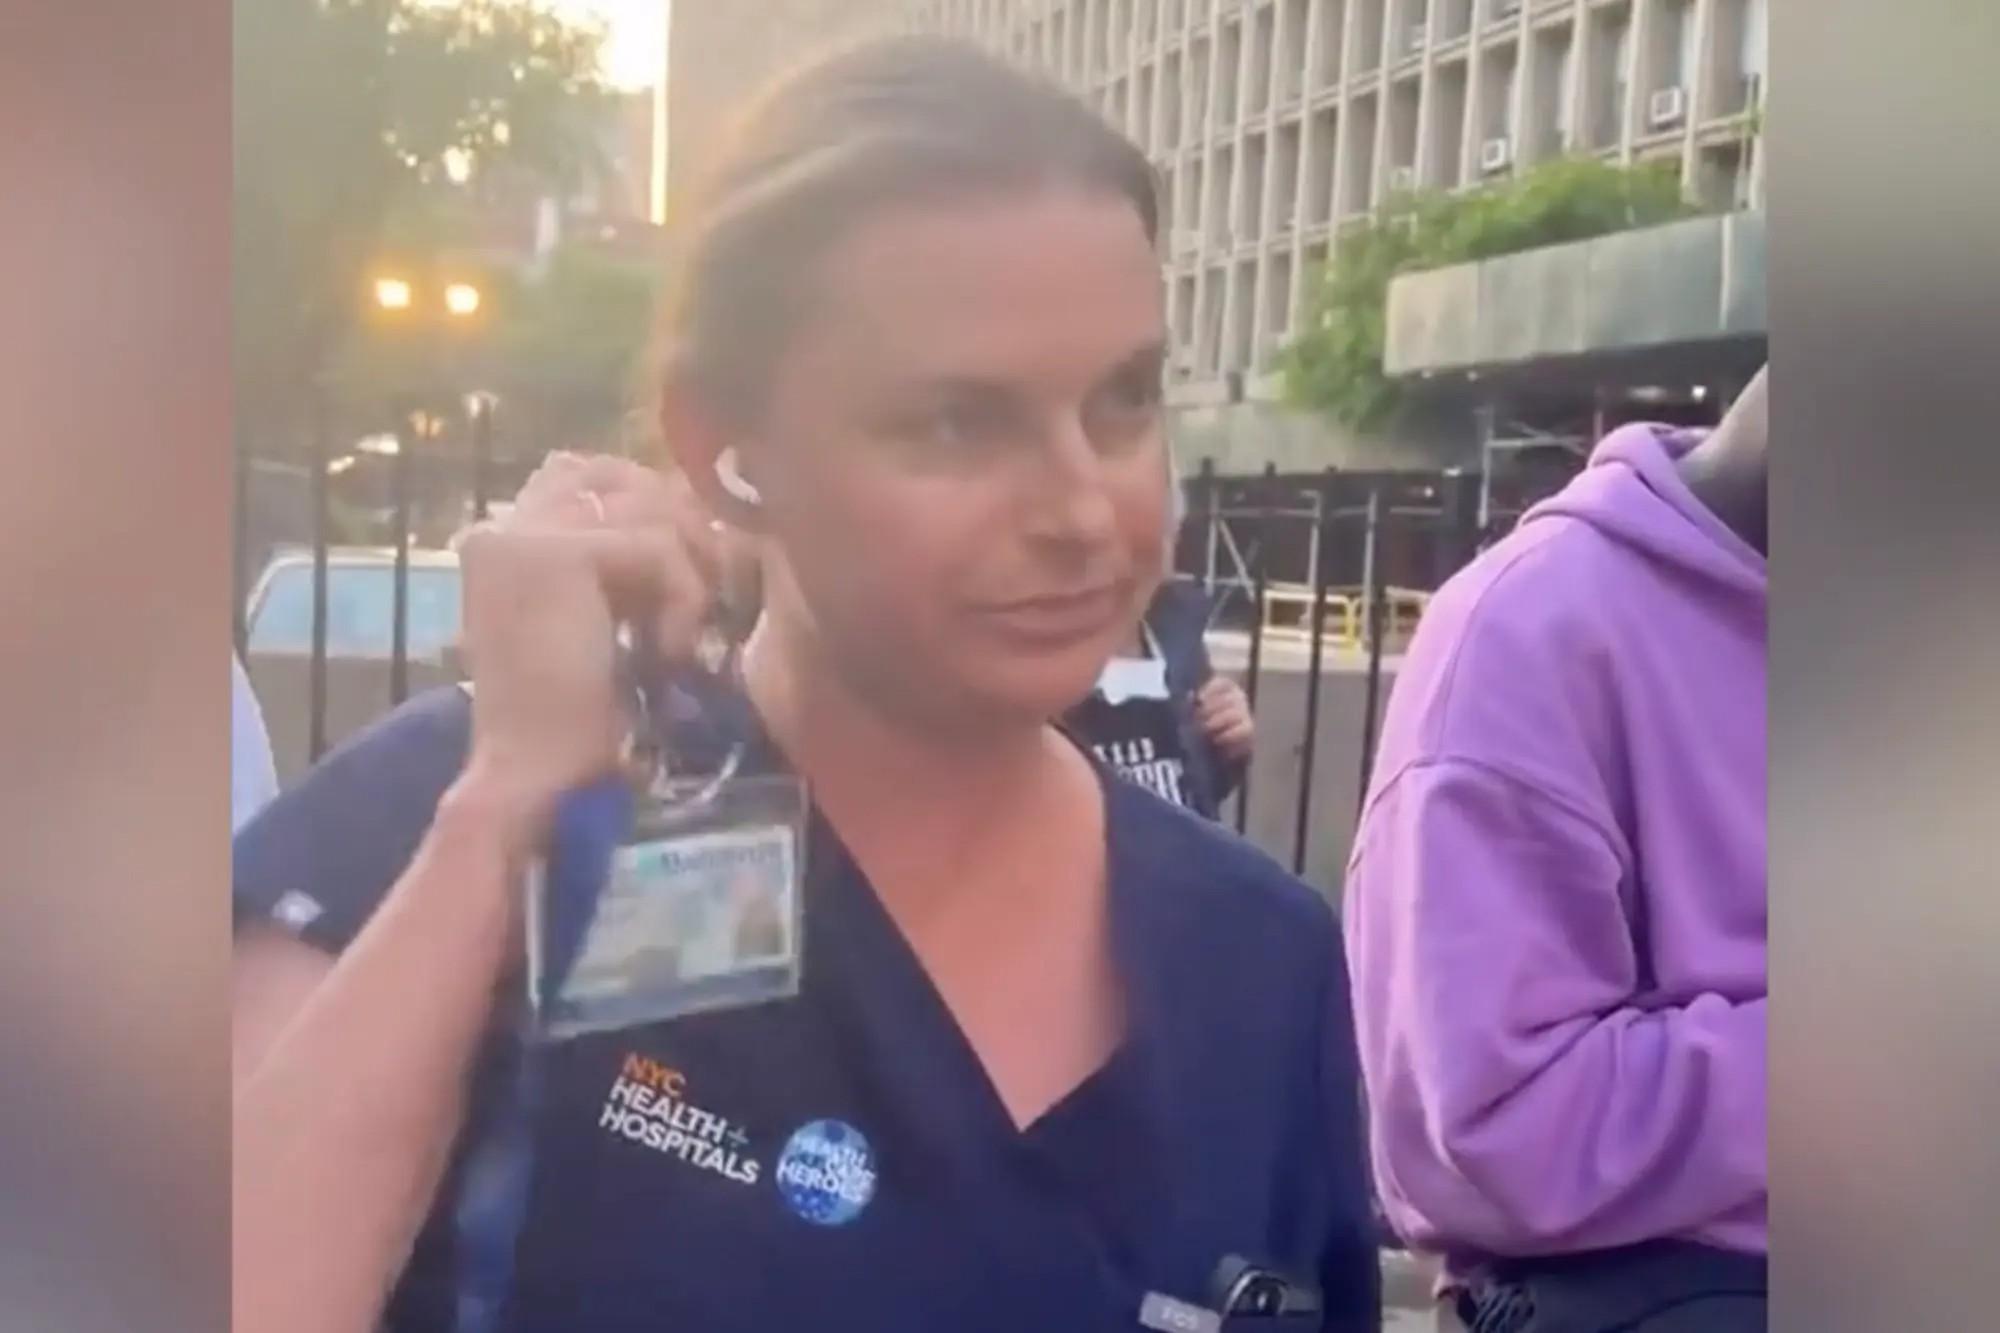 NYC Hospital Karen Paid for Citi Bike in Viral Spat With Black Man, Lawyer Claims